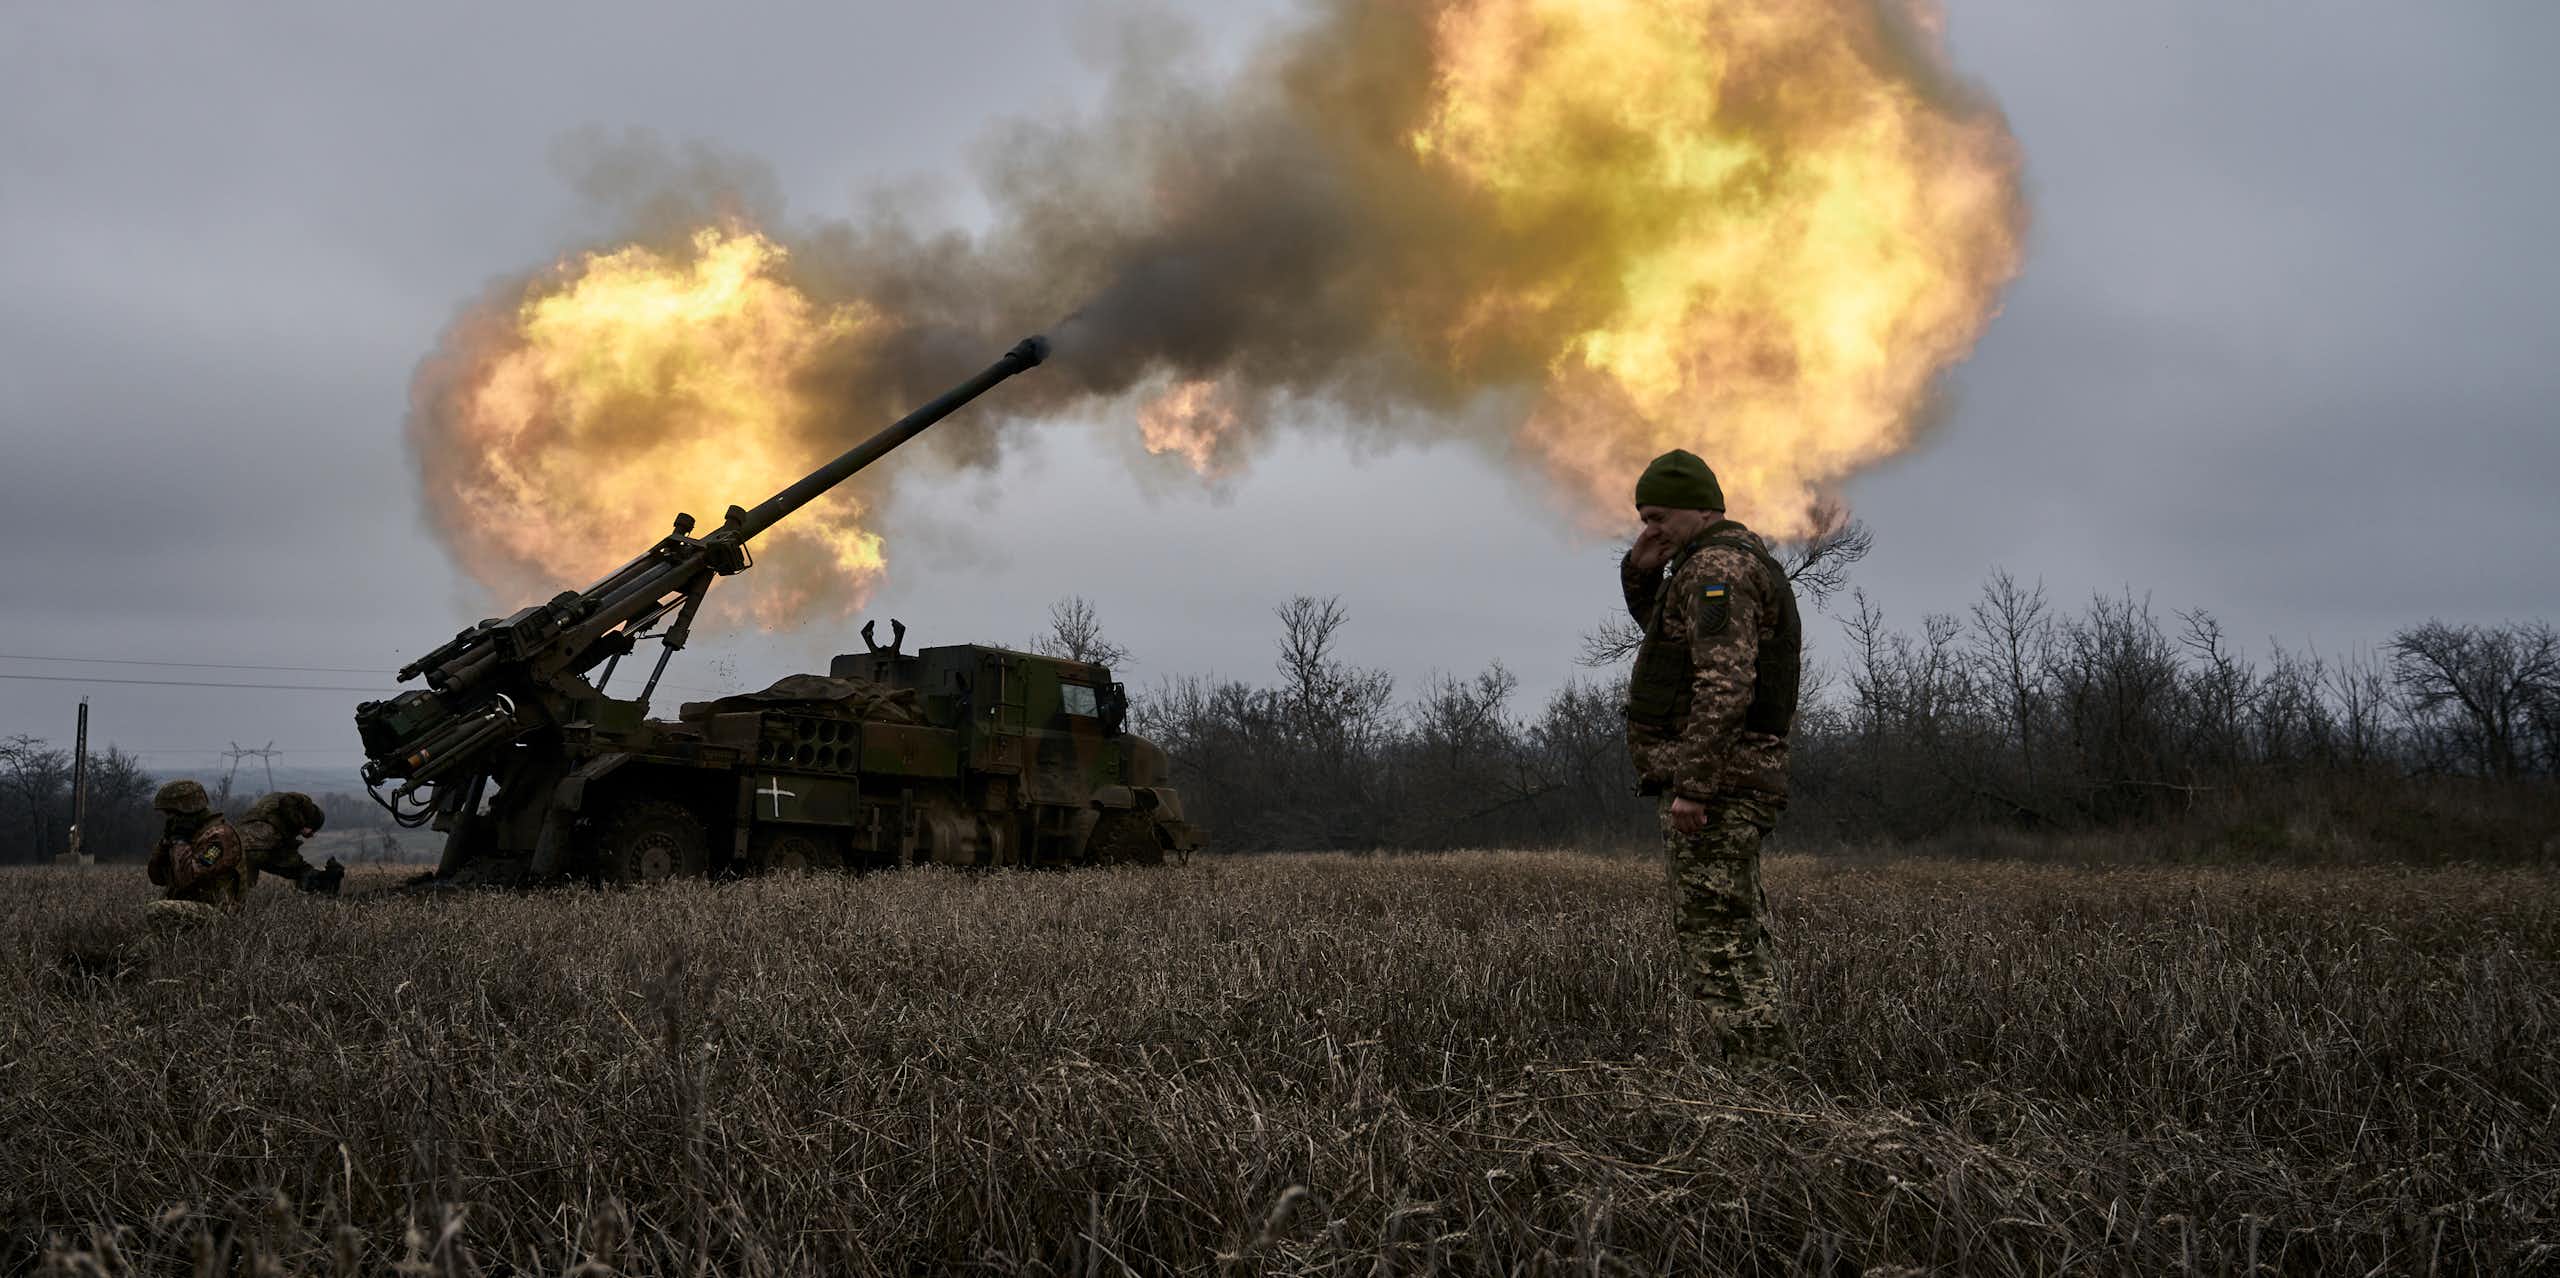 Soldier standing in field covering ears as another solder fires an artillery shell, a cloud of burning smoke rising in the sky